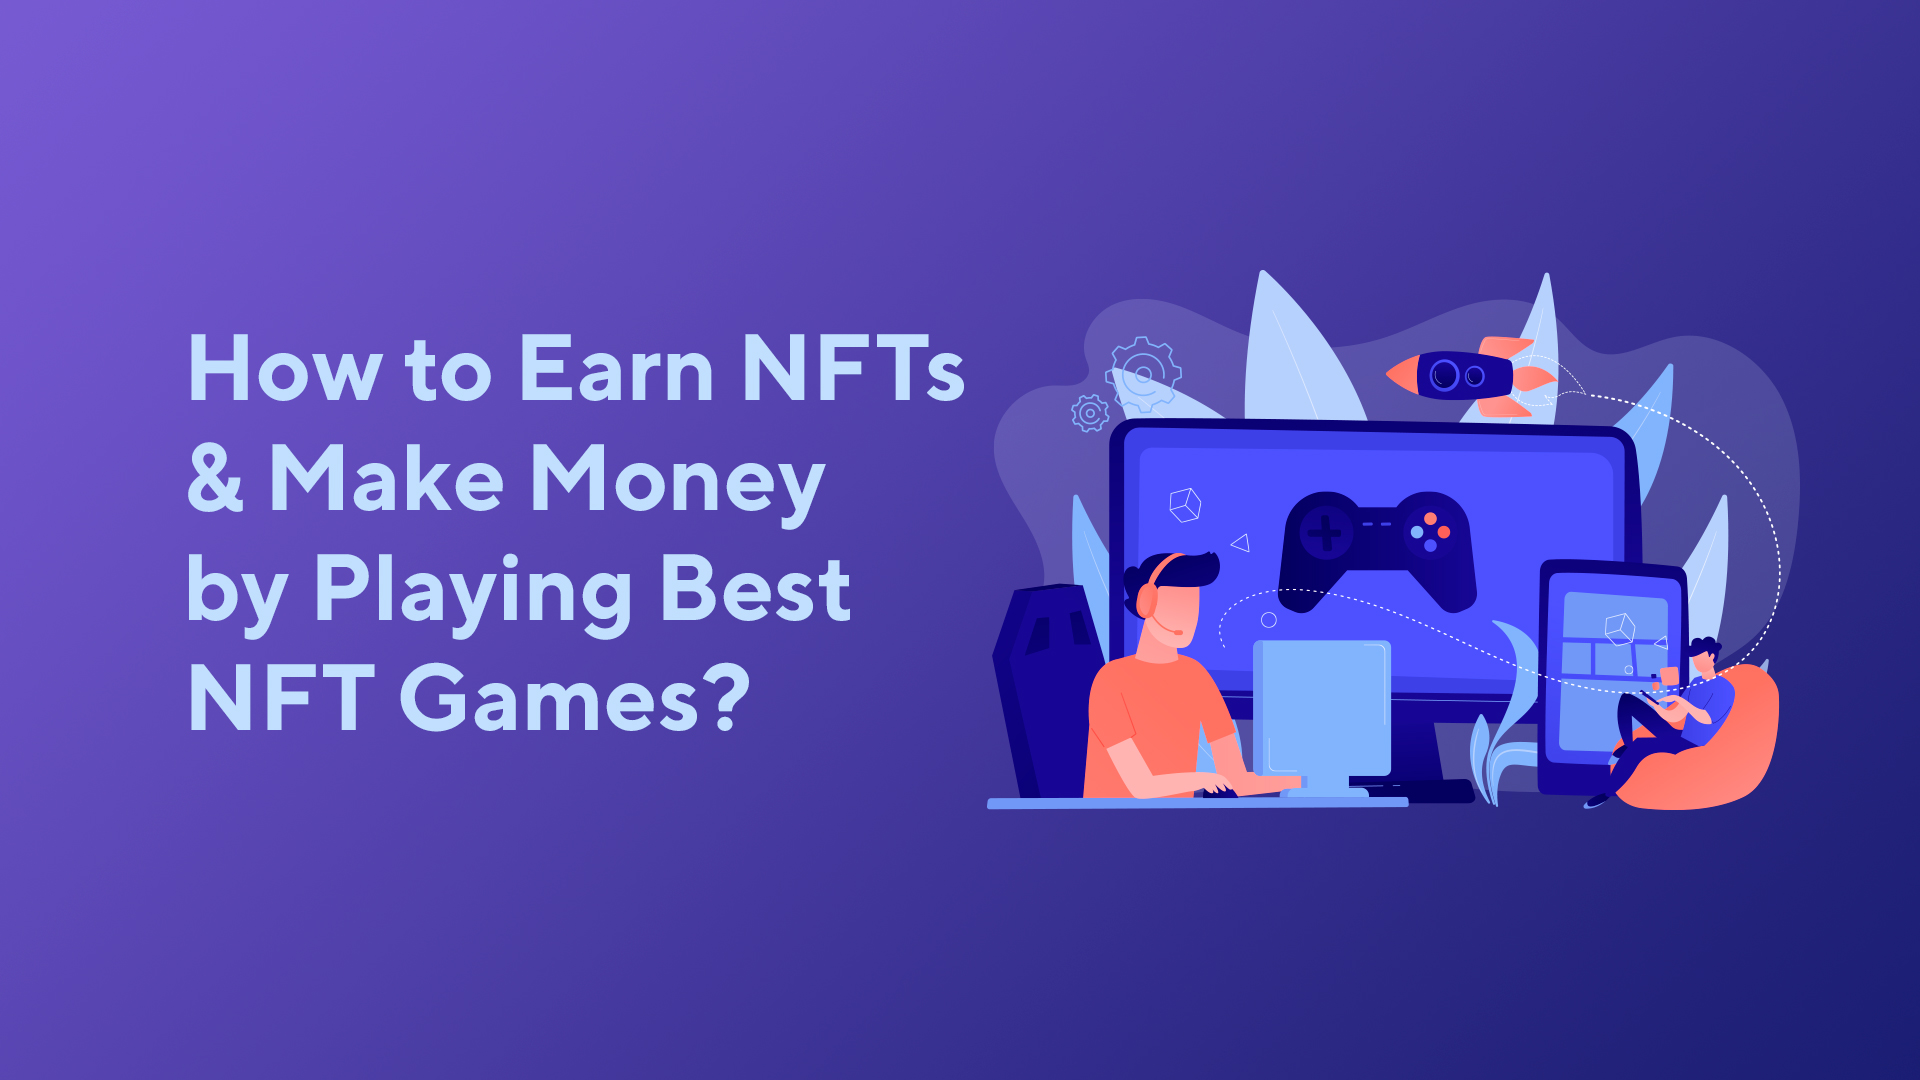 How to Earn NFTs and Make Money by Playing Best NFT Games?